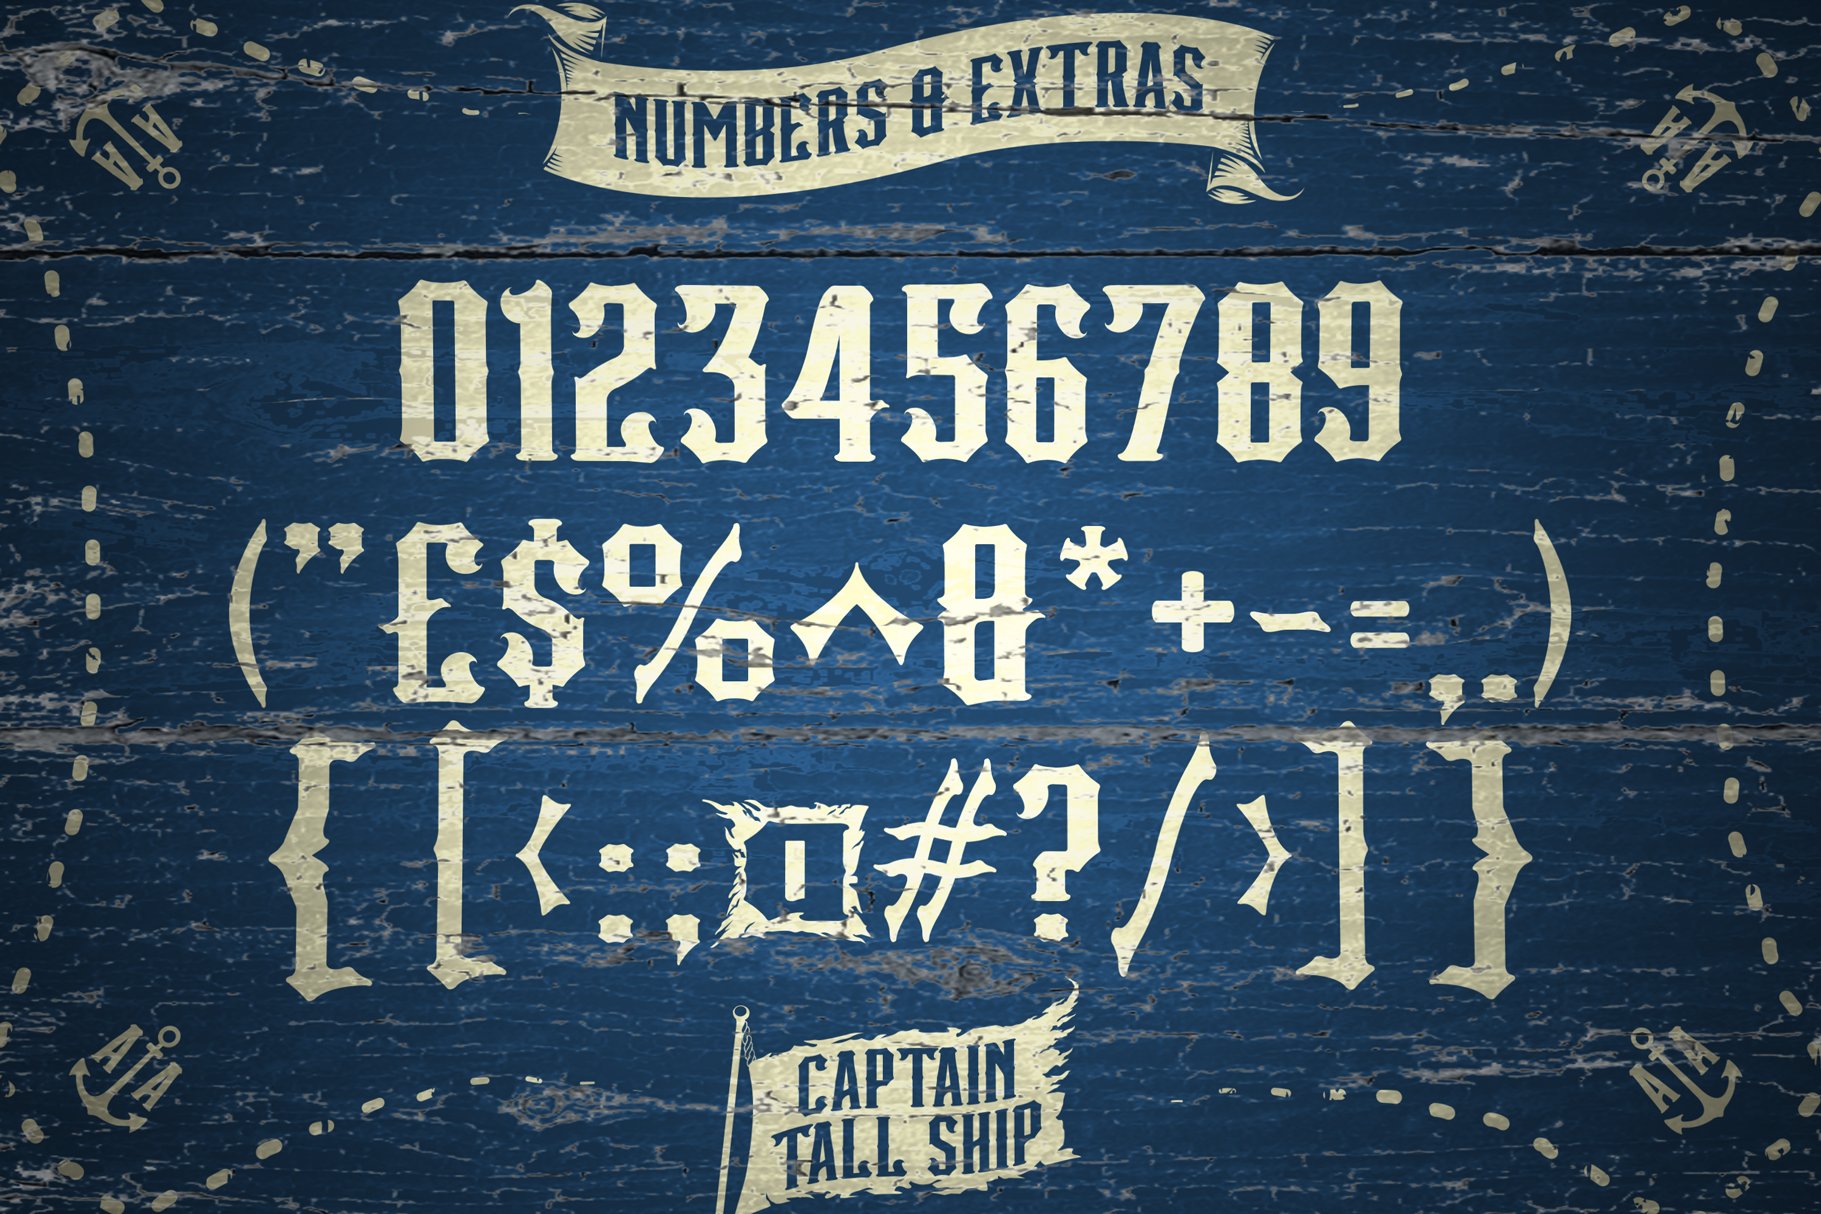 captain tall ship numbers extras 1820x1214 654